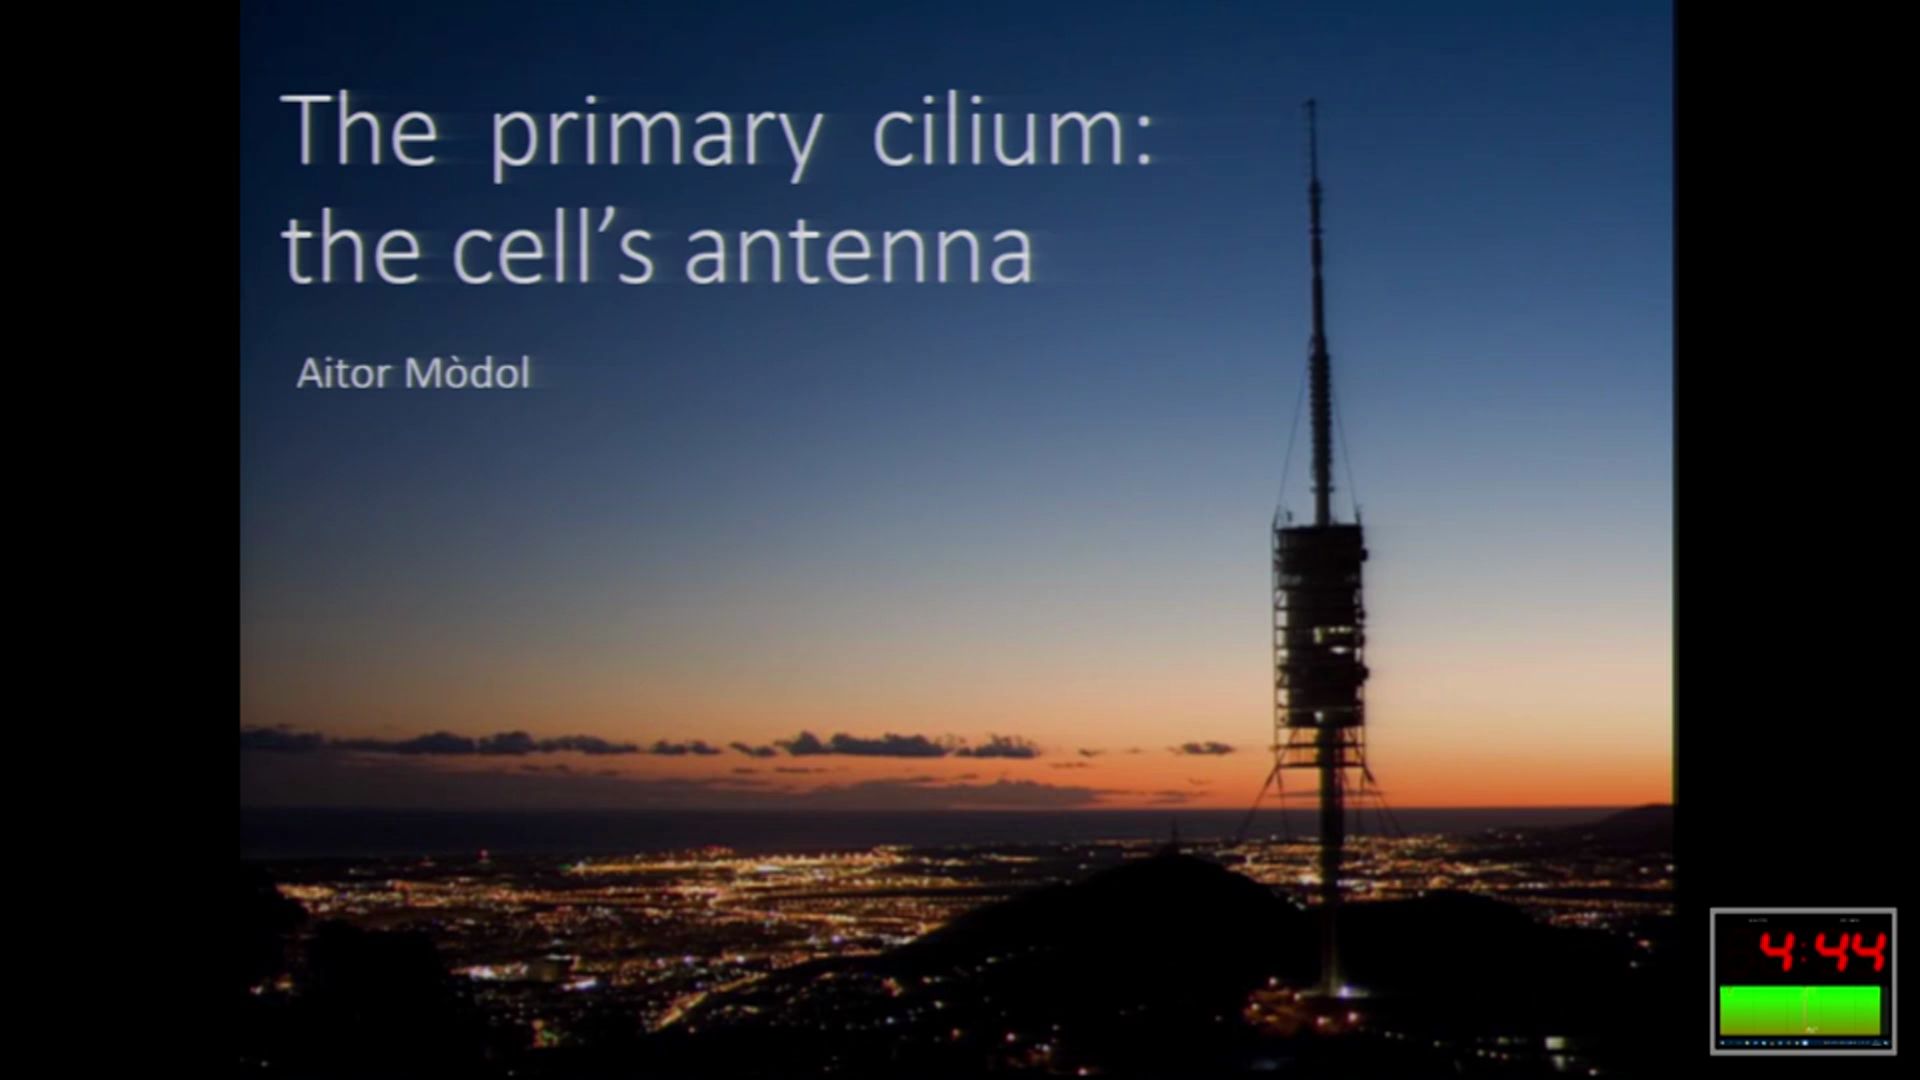 The cillium: the cell's antenna